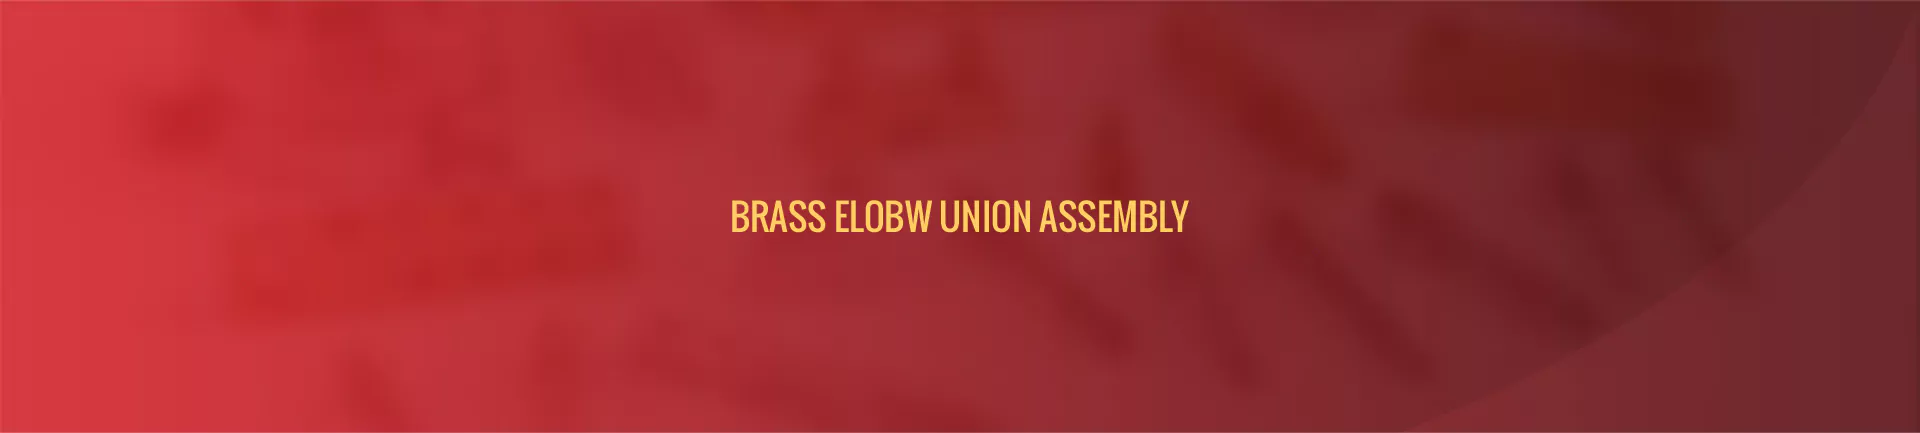 brass_elbow_union_assembly-banner